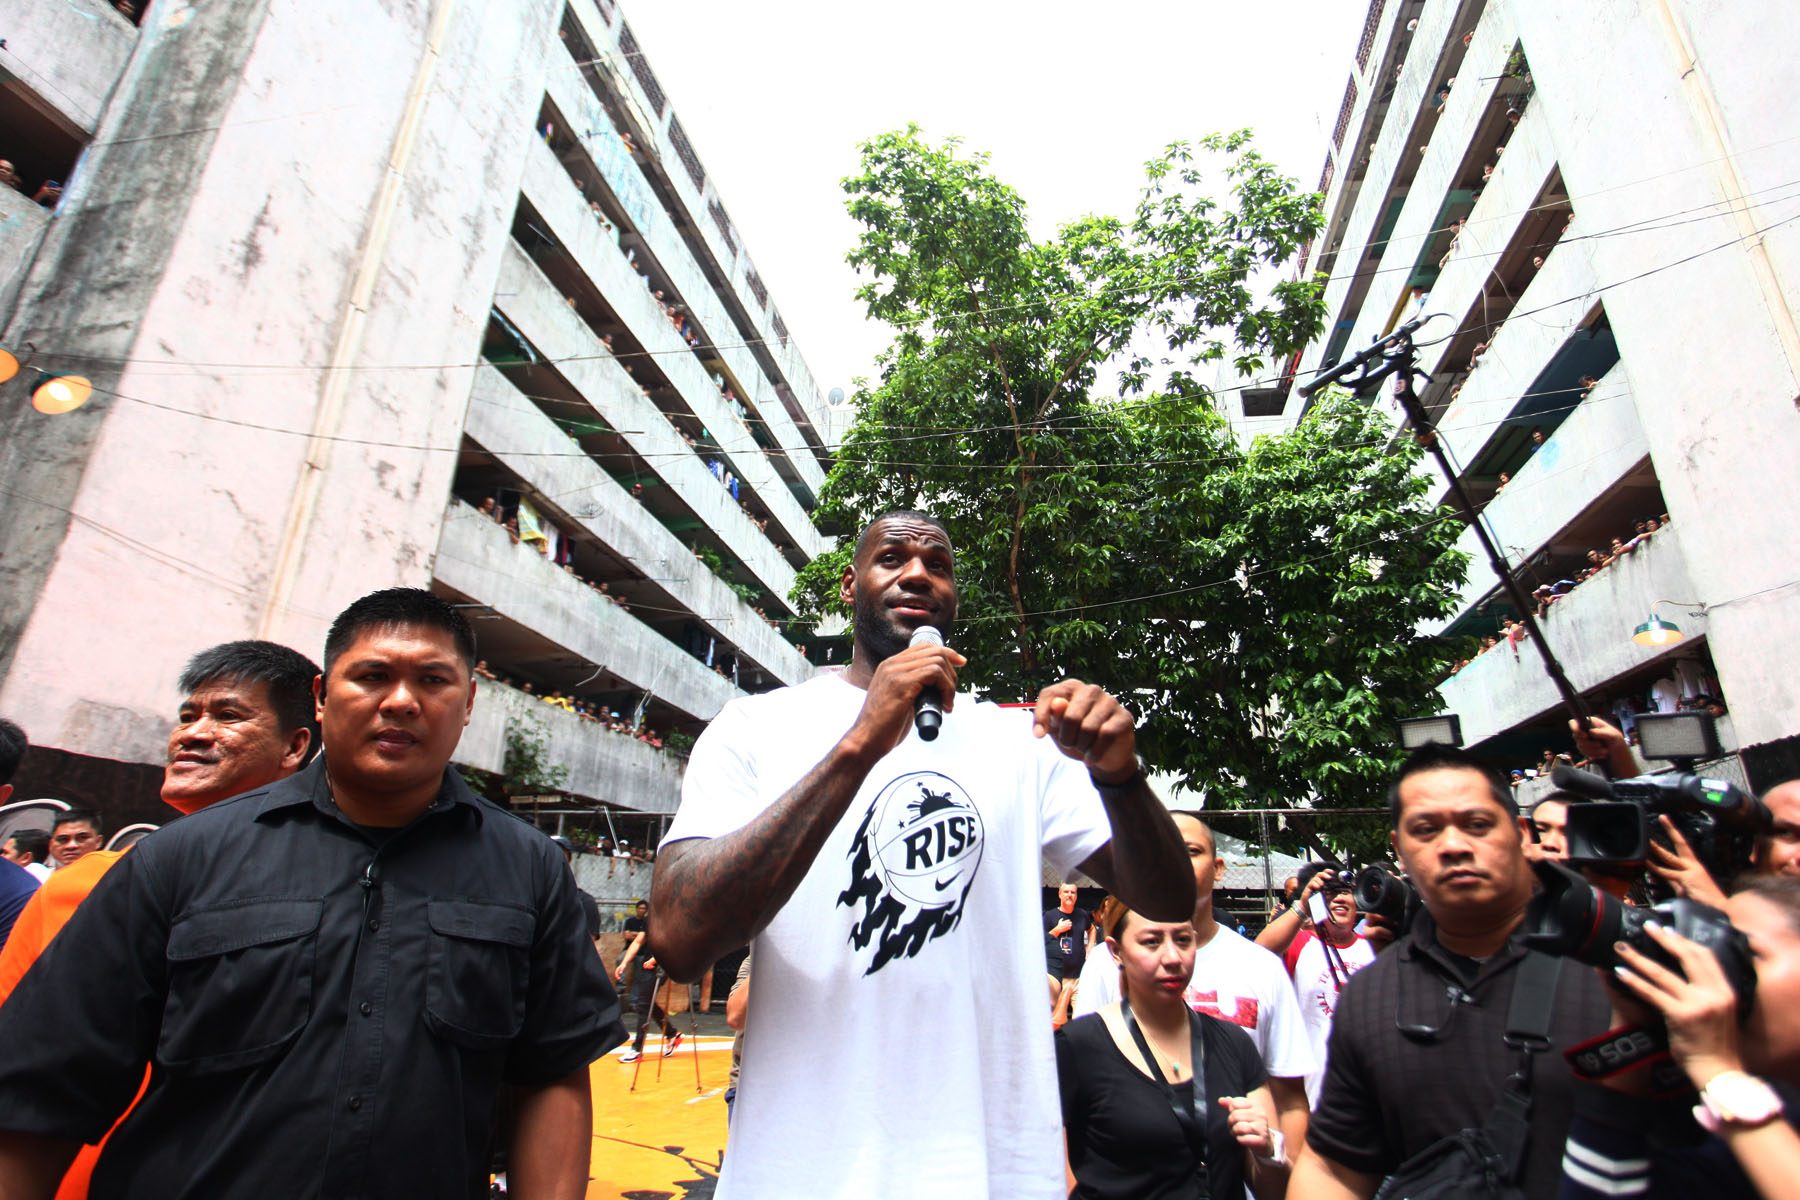 EXCITED. LeBron speaks to the crowd that excitedly gathered to see him. Photo by Josh Albelda/Rappler 